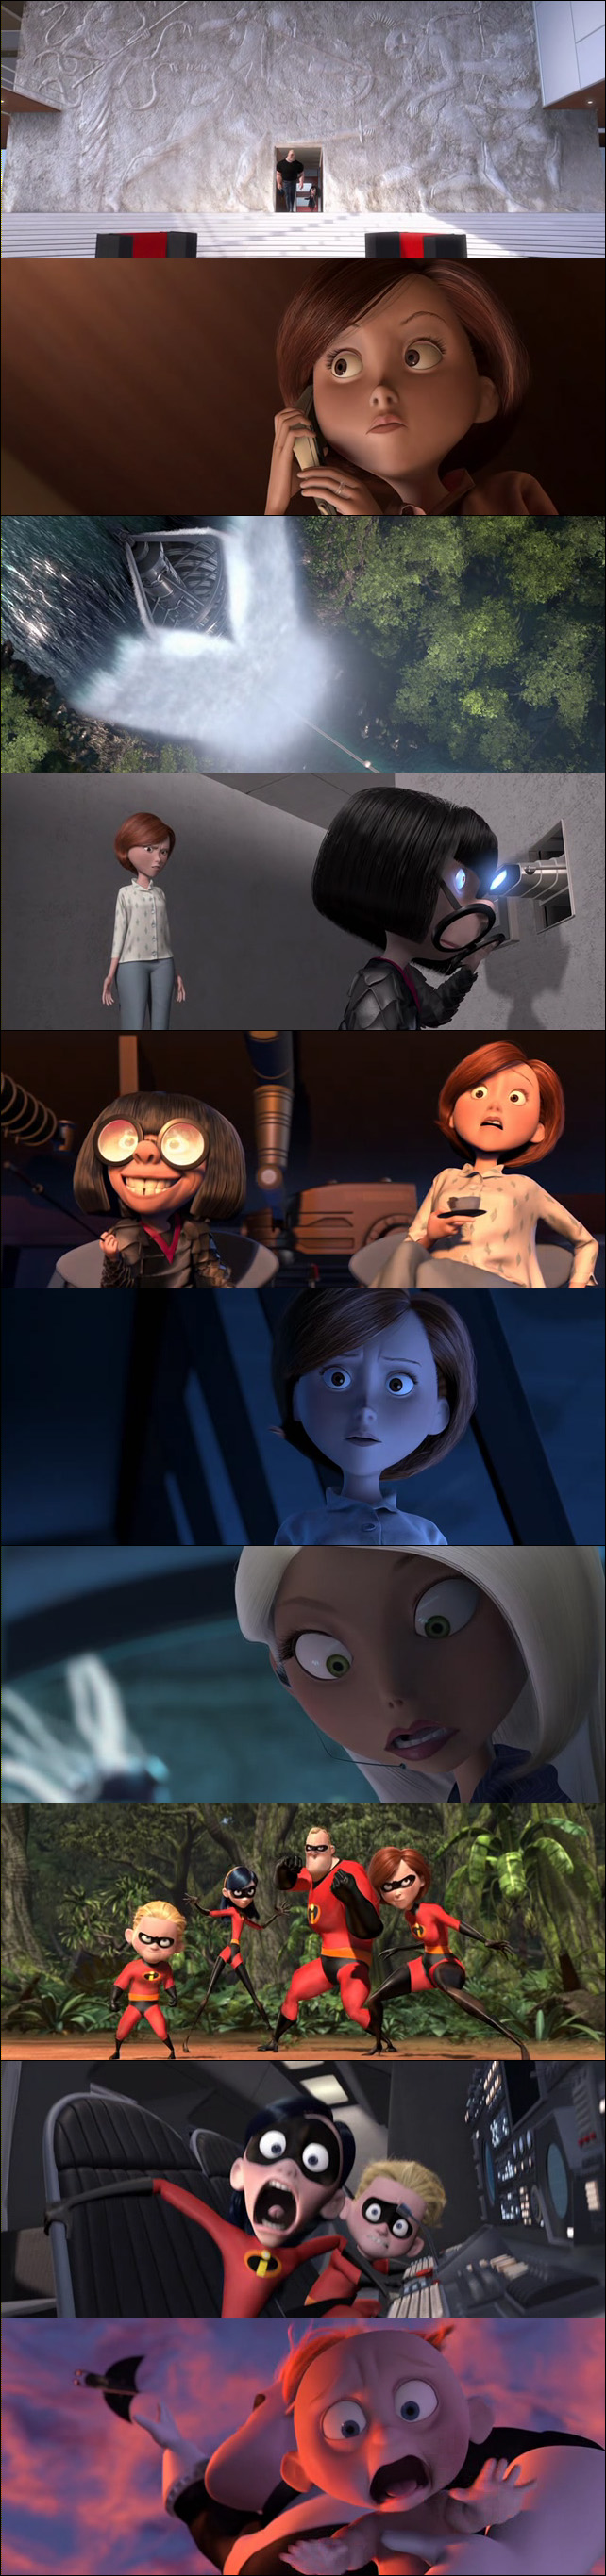 the_incredibles_capture02.jpg